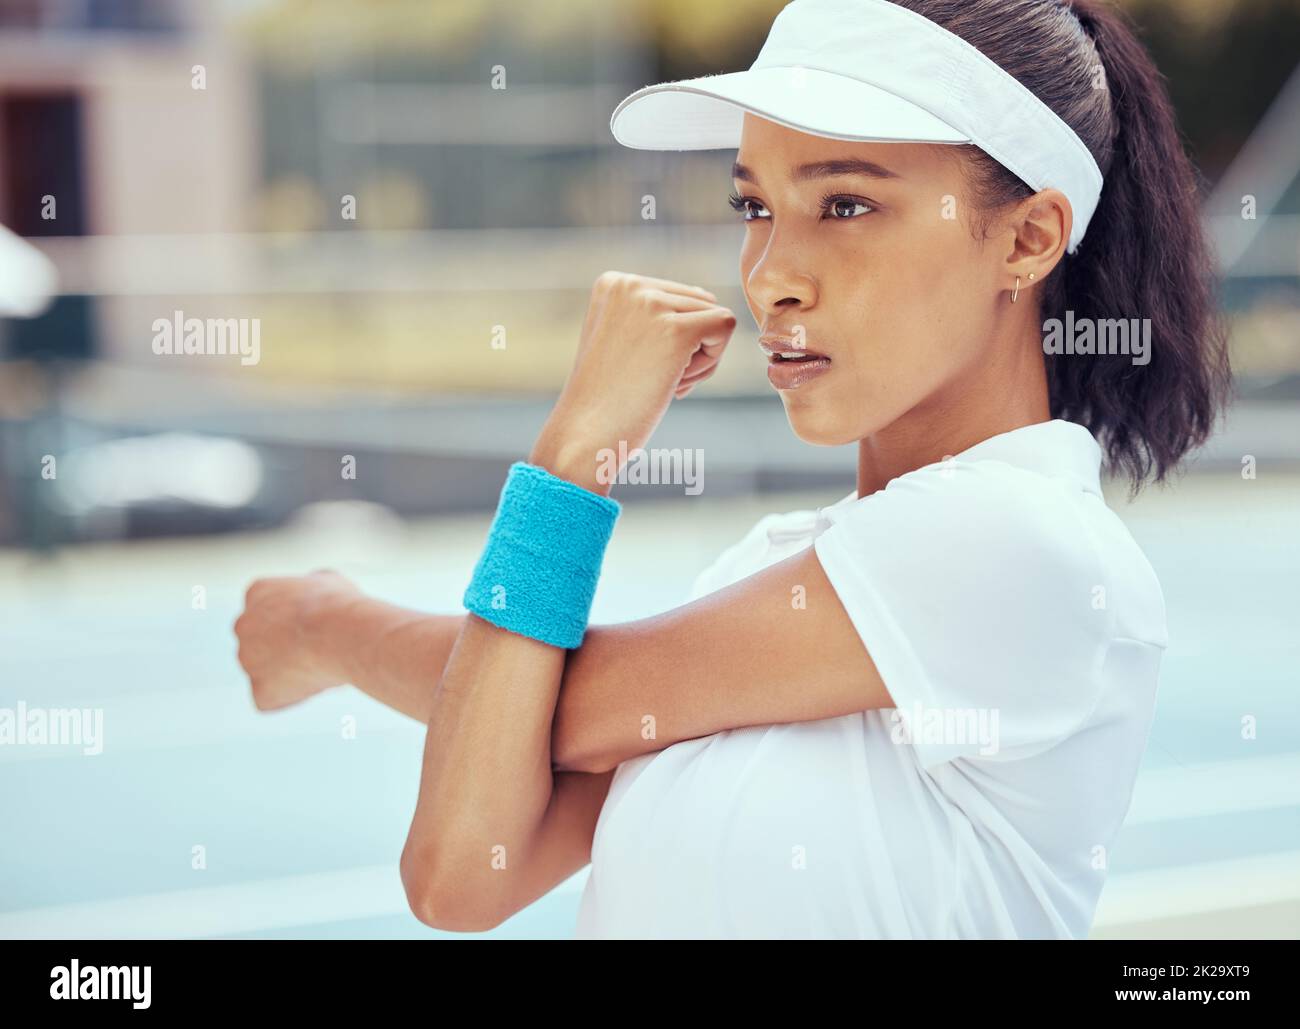 Tennis woman, competitive sport and warmup exercise with a player stretching to prepare for a game or match at an outdoor court. Fitness, competition Stock Photo